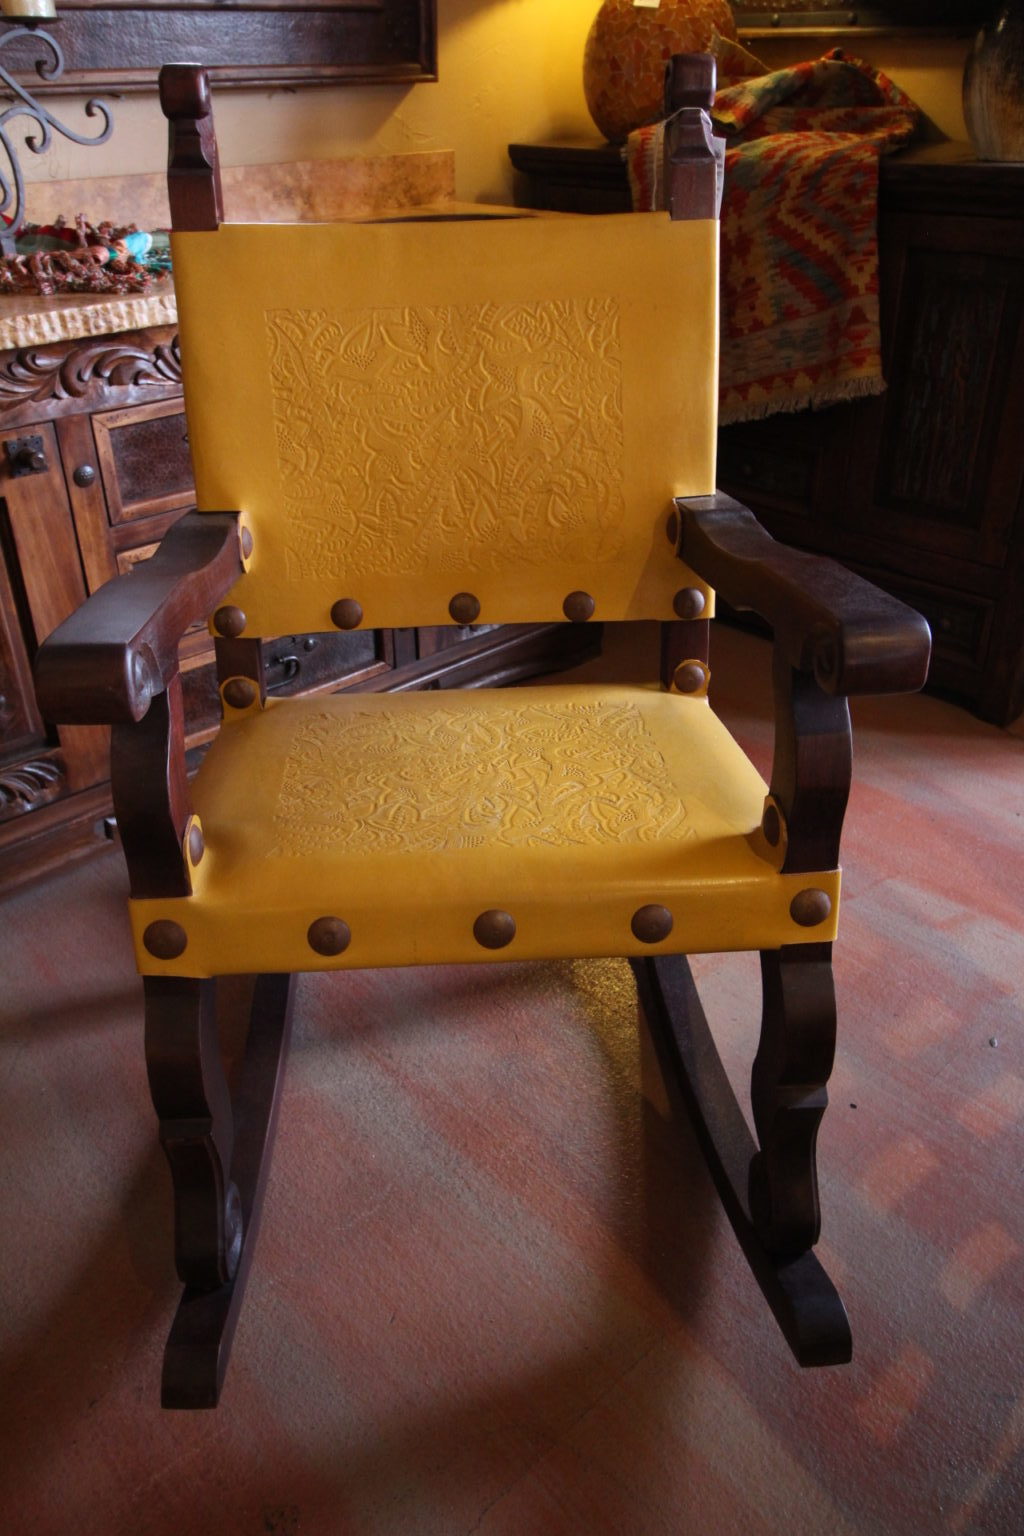 Argentina Tooled Leather Rocking Chair in Yellow